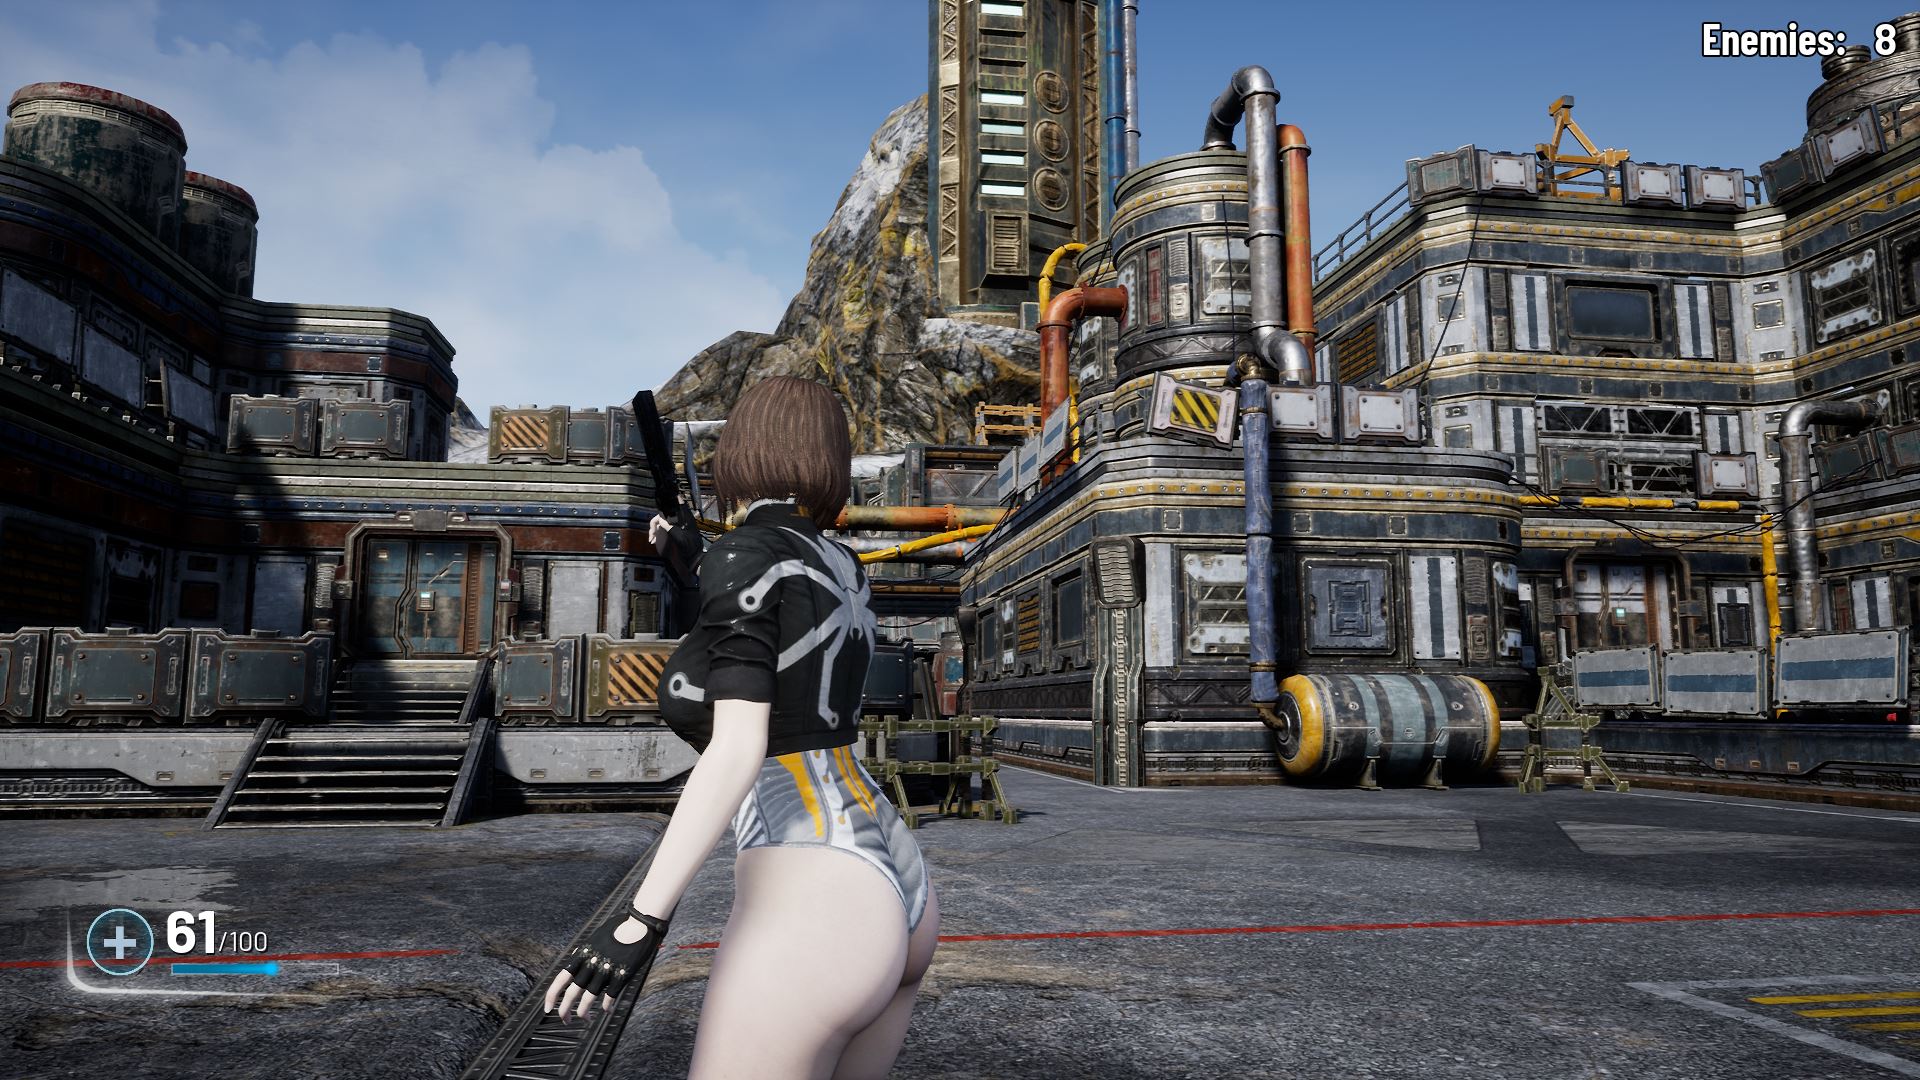 Bot Shooter Unreal Engine Porn Sex Game Vfinal Download For Windows 